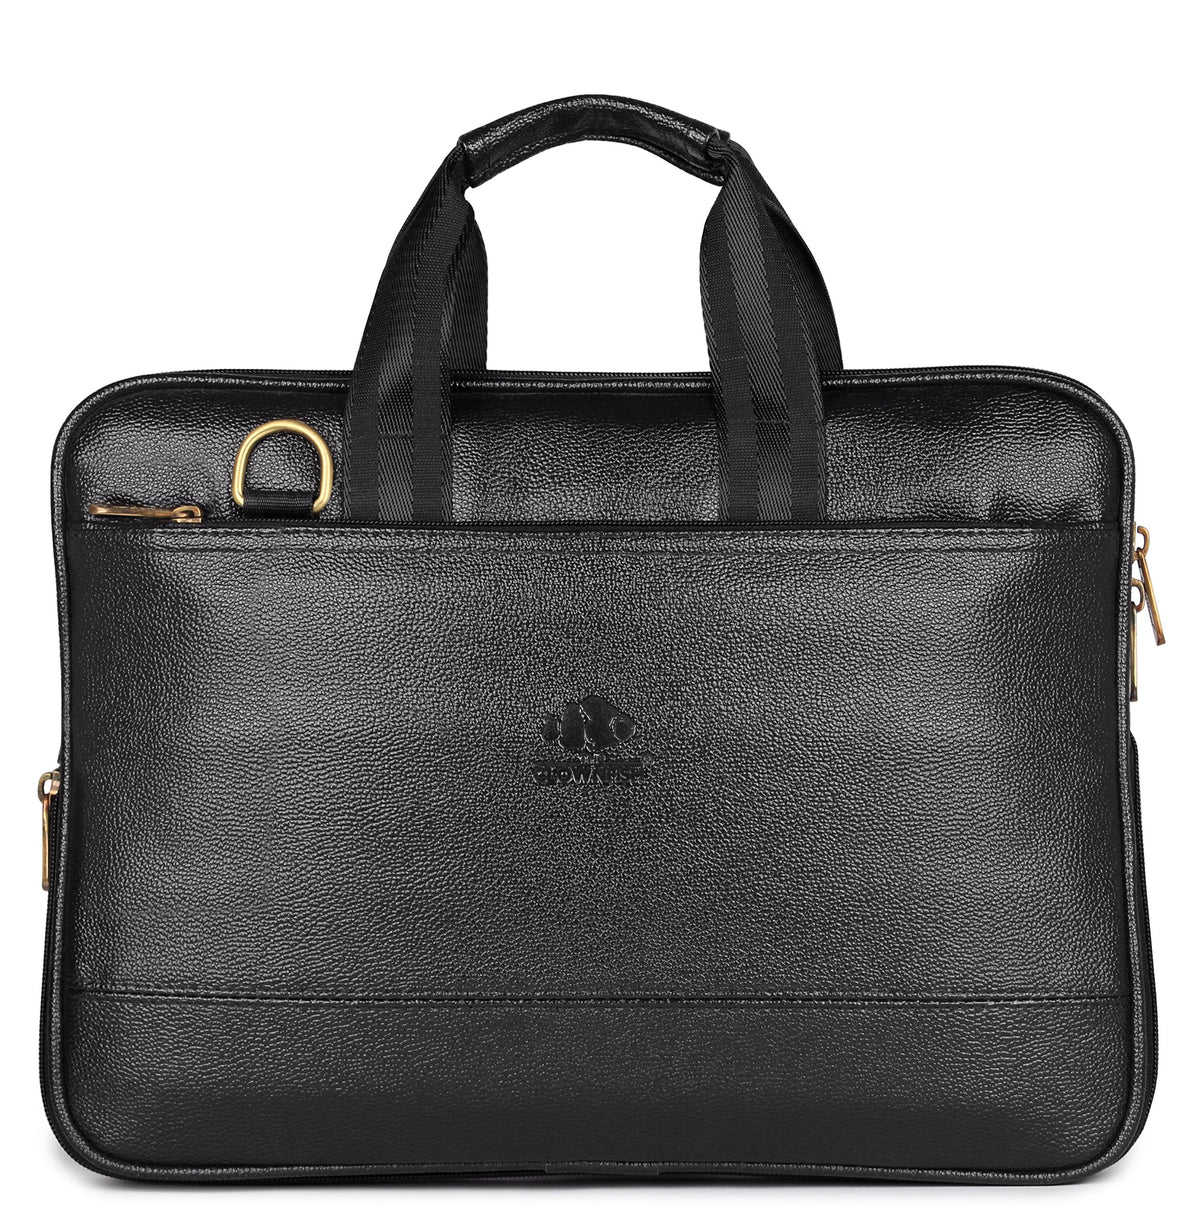 THE CLOWNFISH Messiah Vegan Leather 14 inch Black Laptop Briefcase